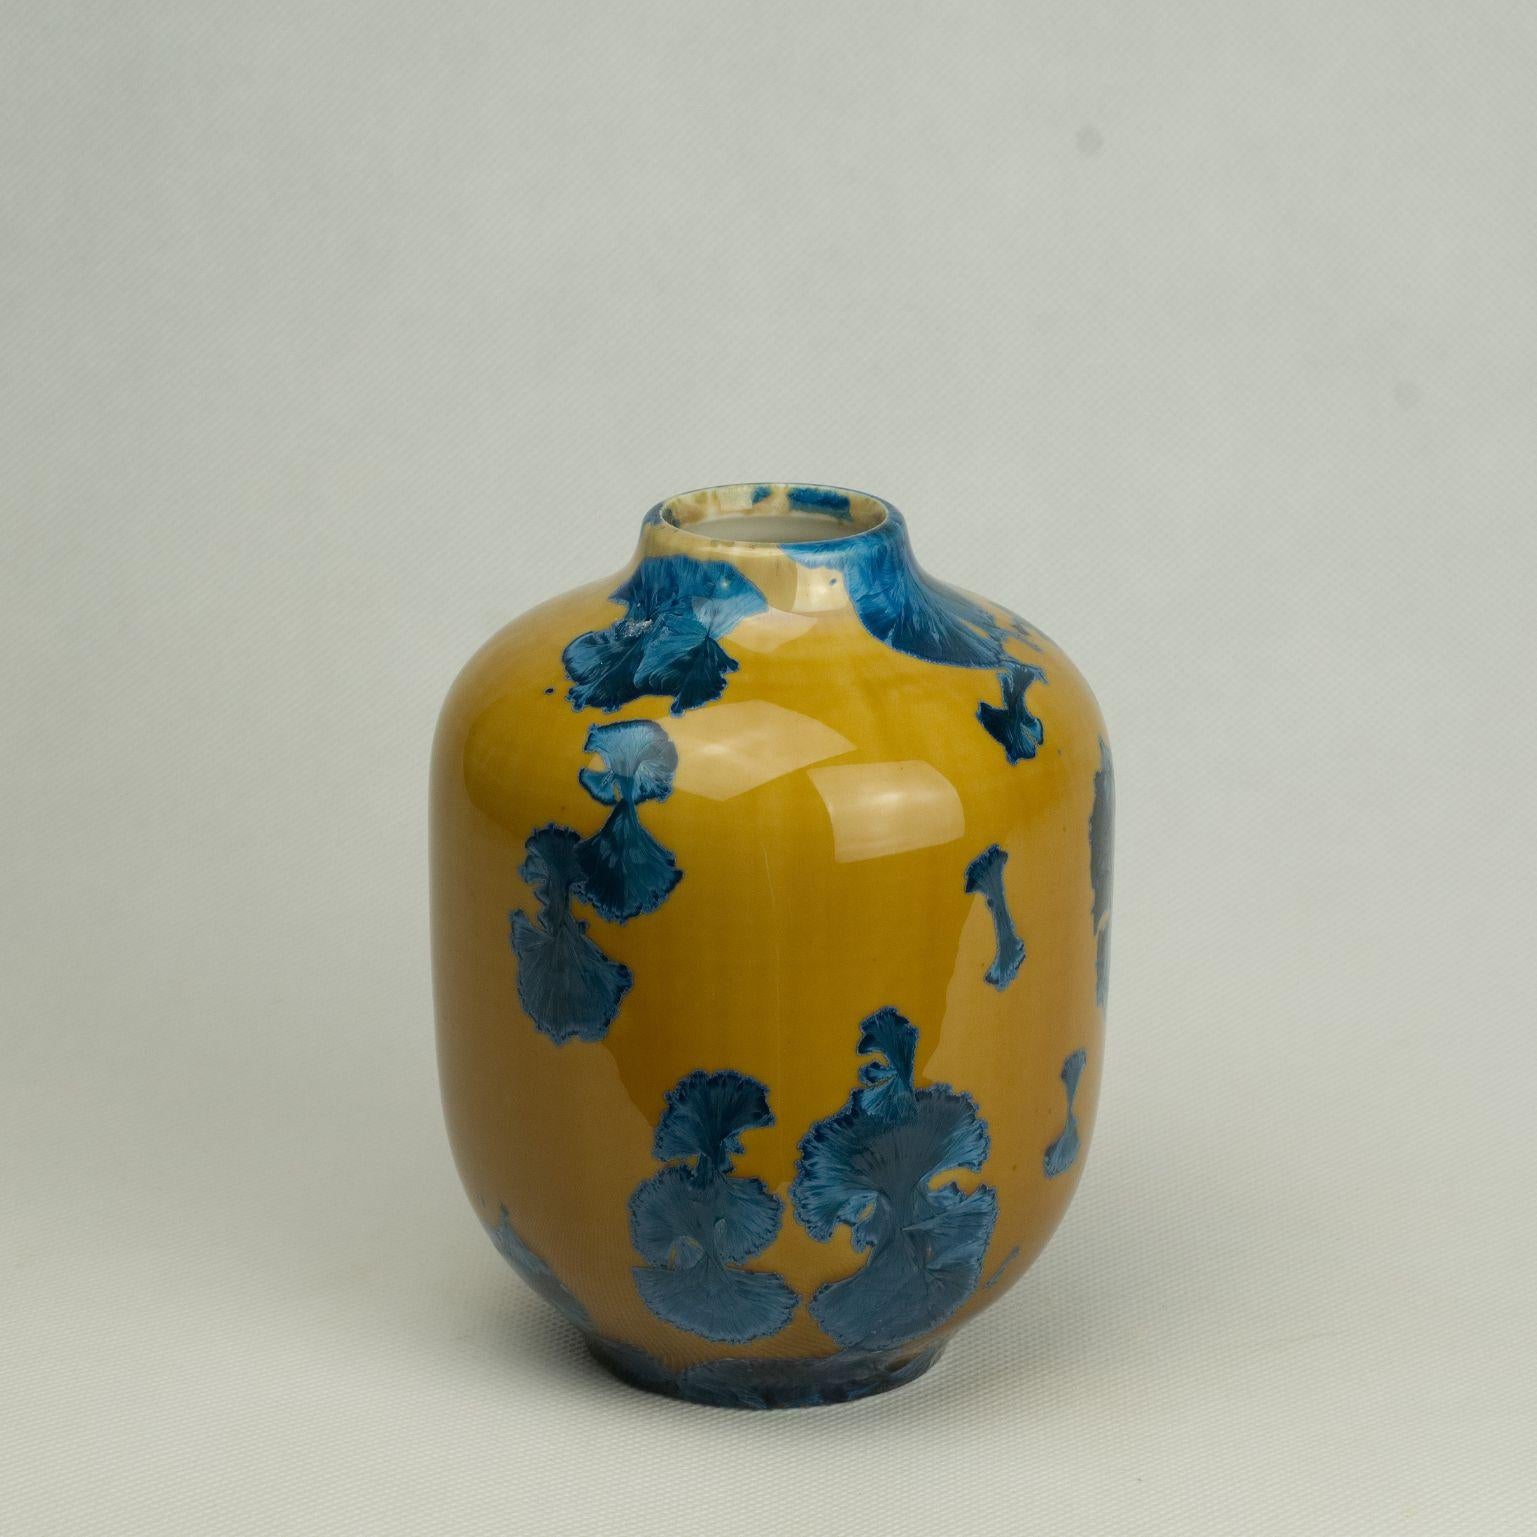 Volume 1 vase by Milan Pekar
Dimensions: D11 x H15 cm
Materials: Glaze, Porcelain

Hand-made in the Czech Republic. 

Also Available: different colors and patterns

Established own studio August 2009 – Focus mainly on porcelain, developing